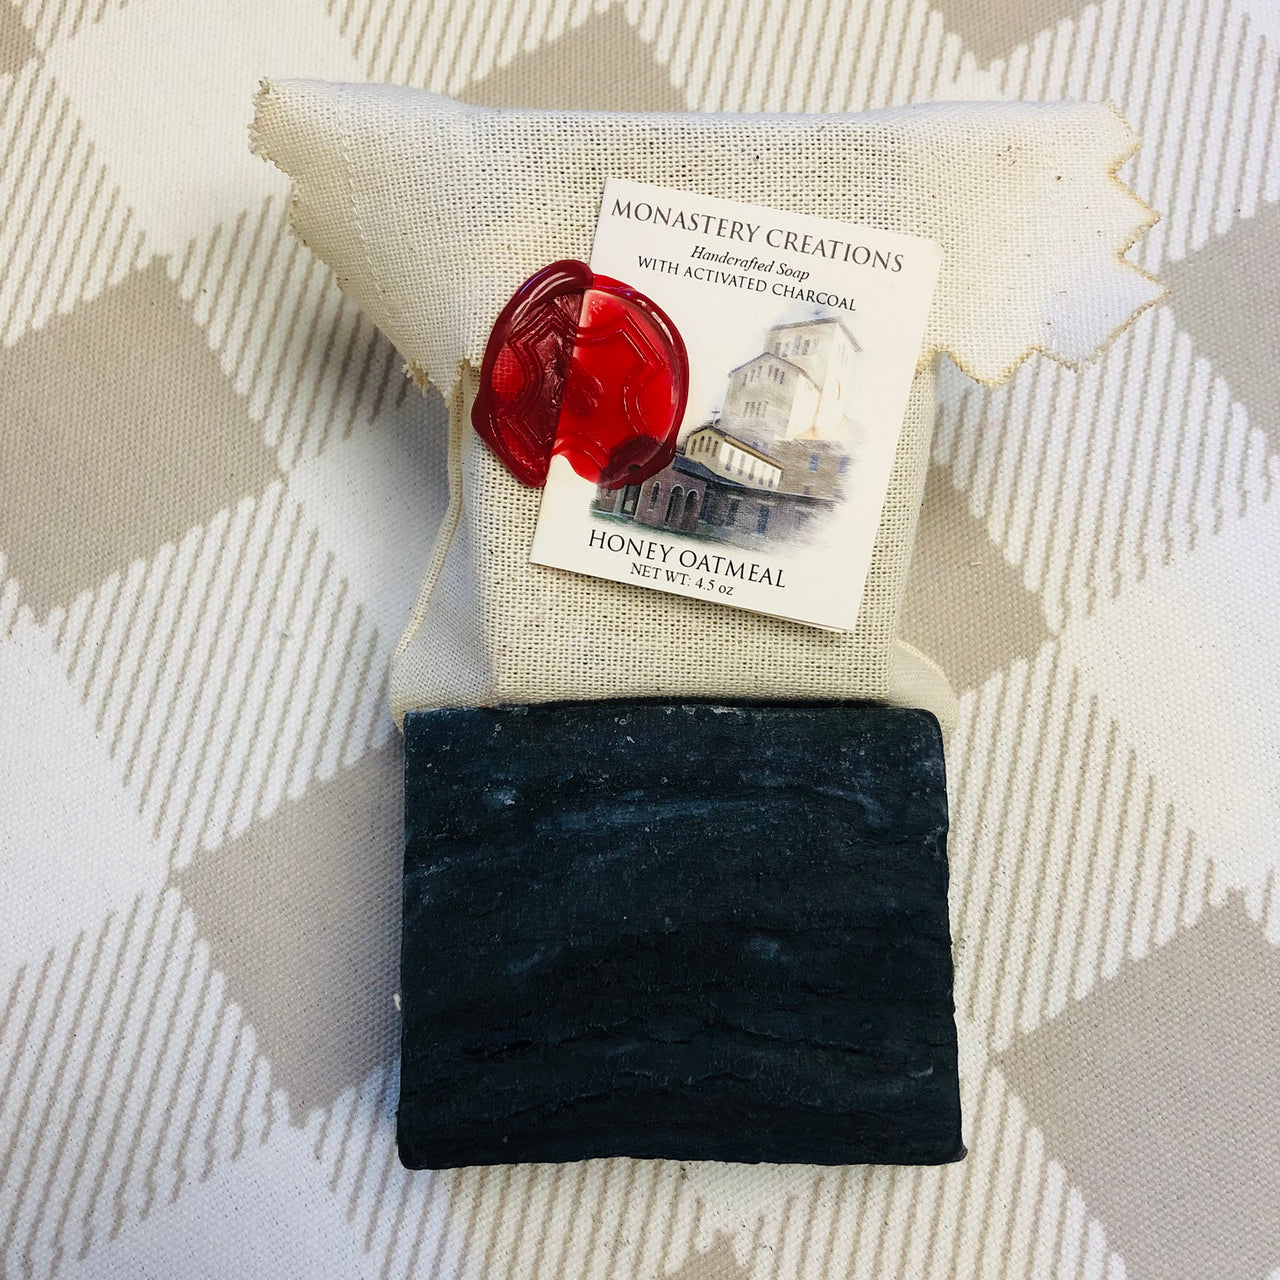 Soap made with Activated Charcoal